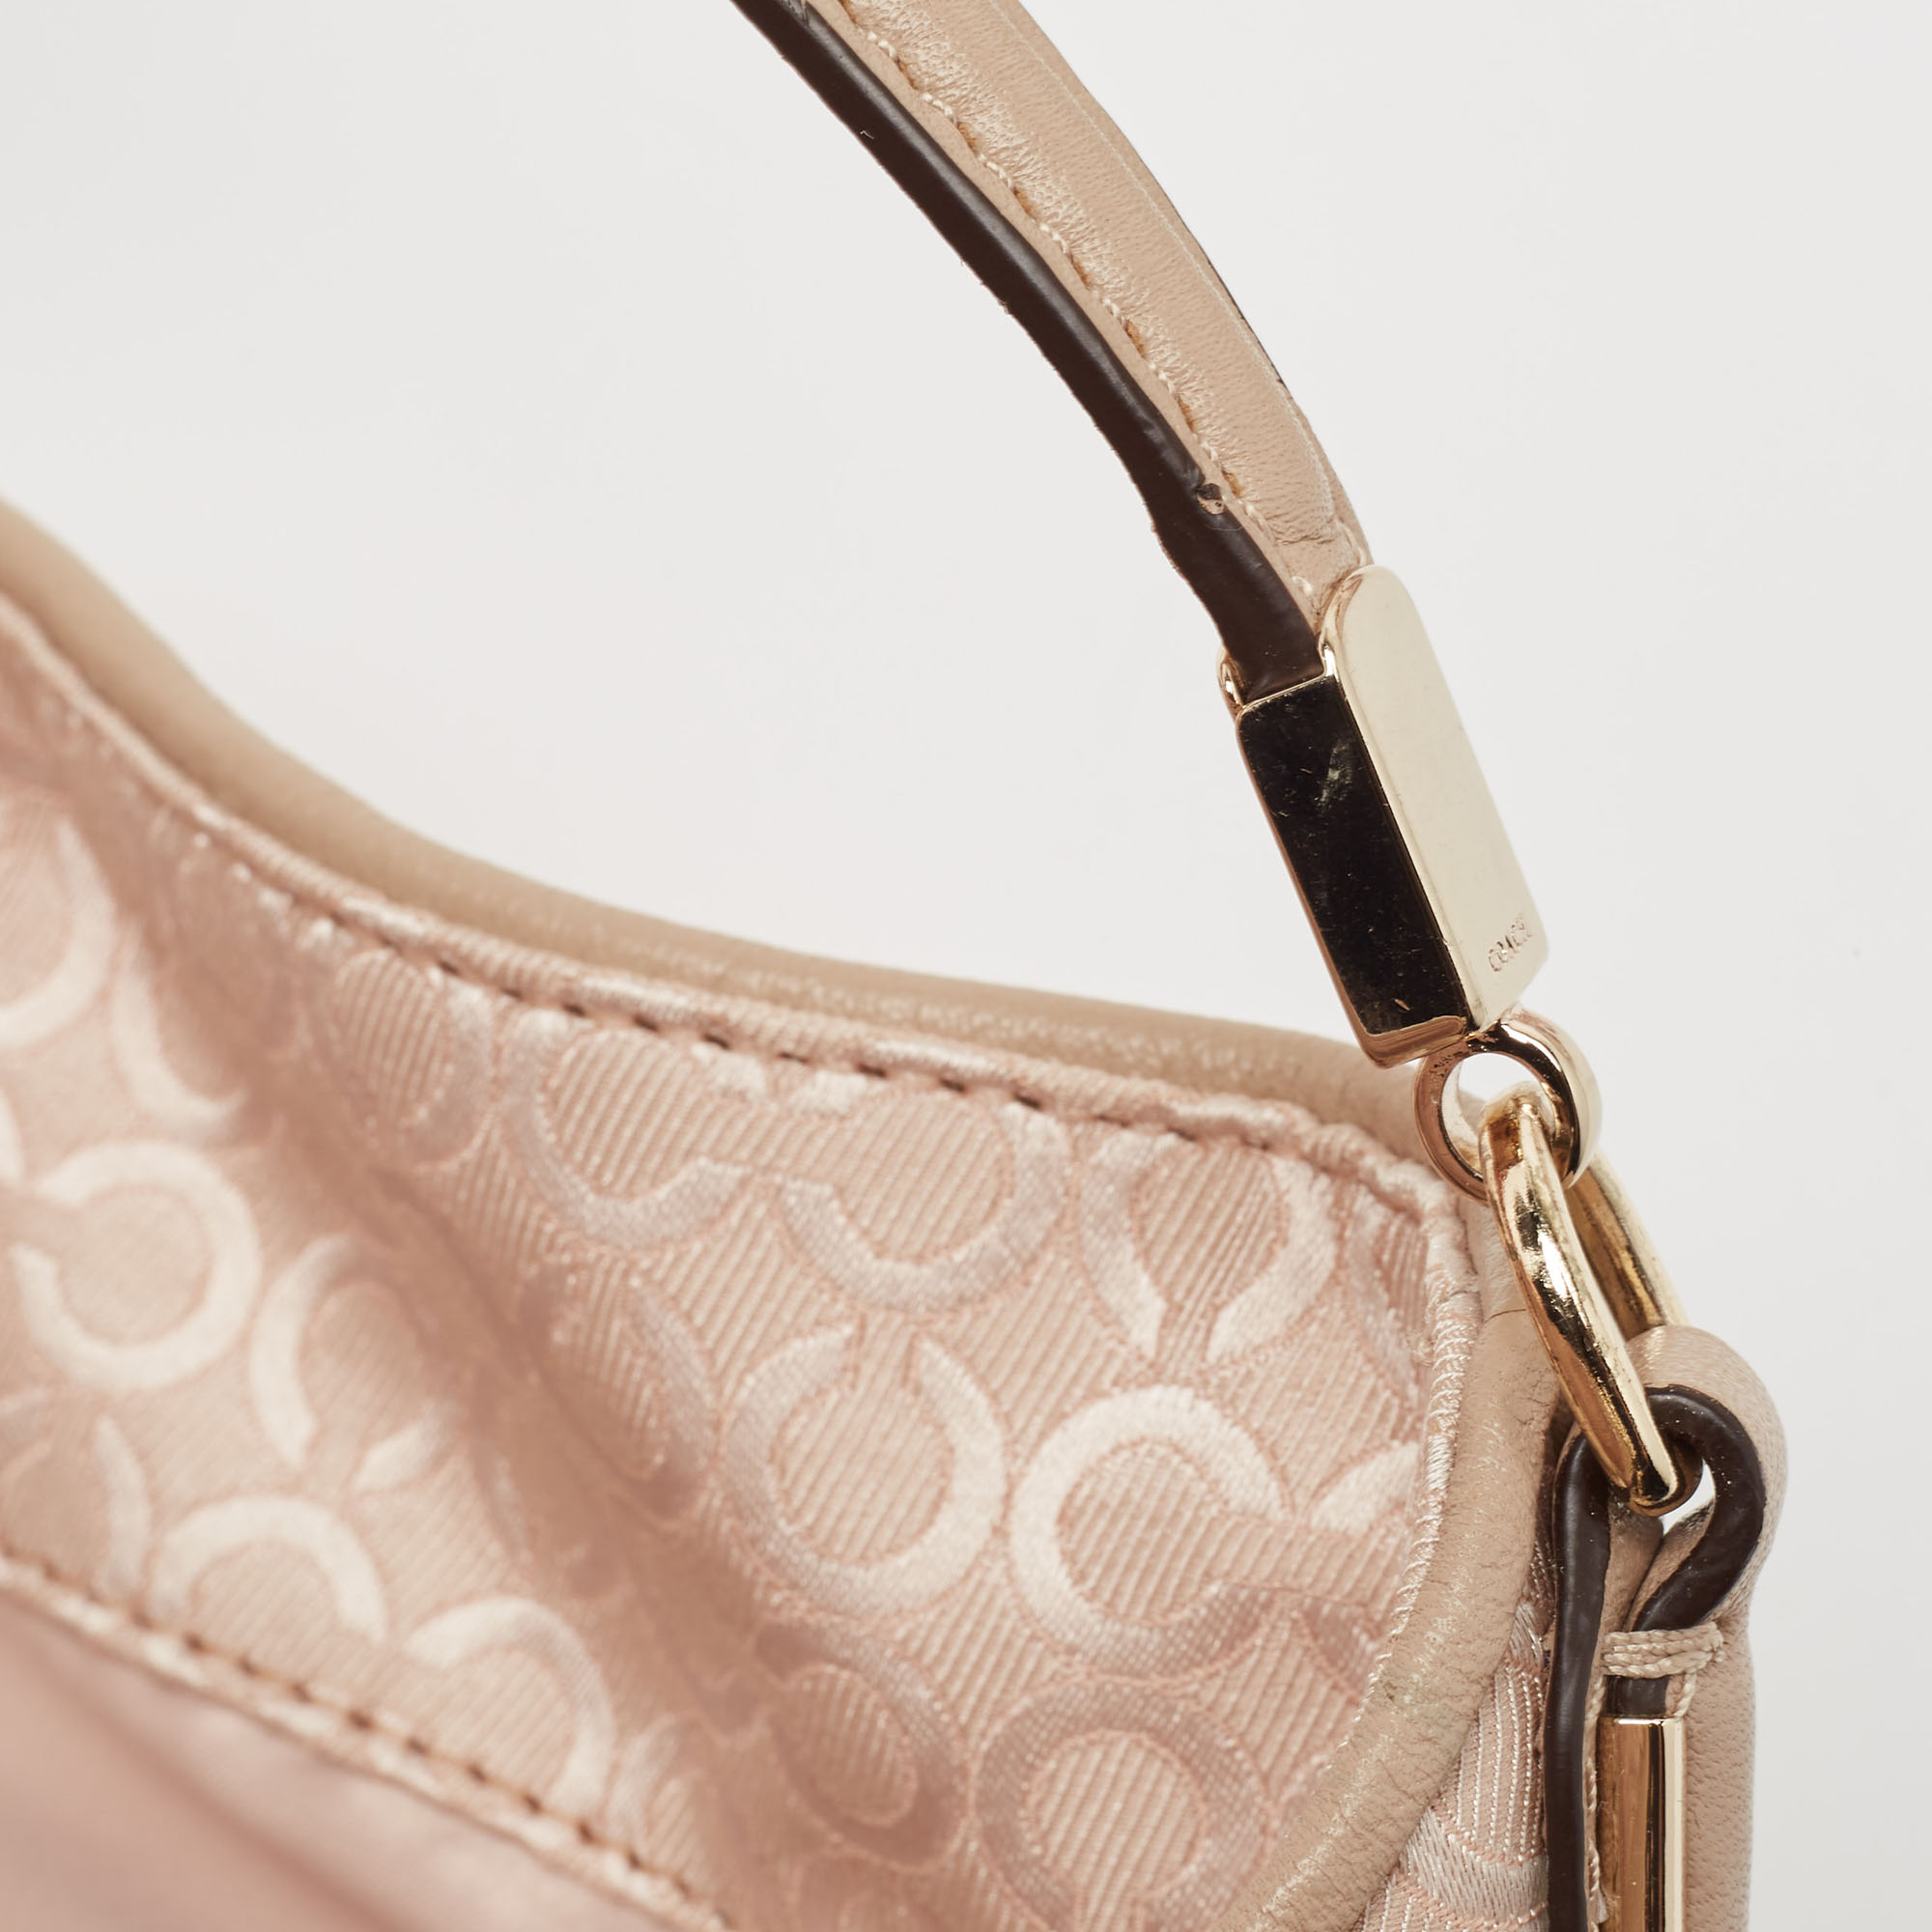 Coach Pink Canvas And Python Embossed Leather Edie Hobo